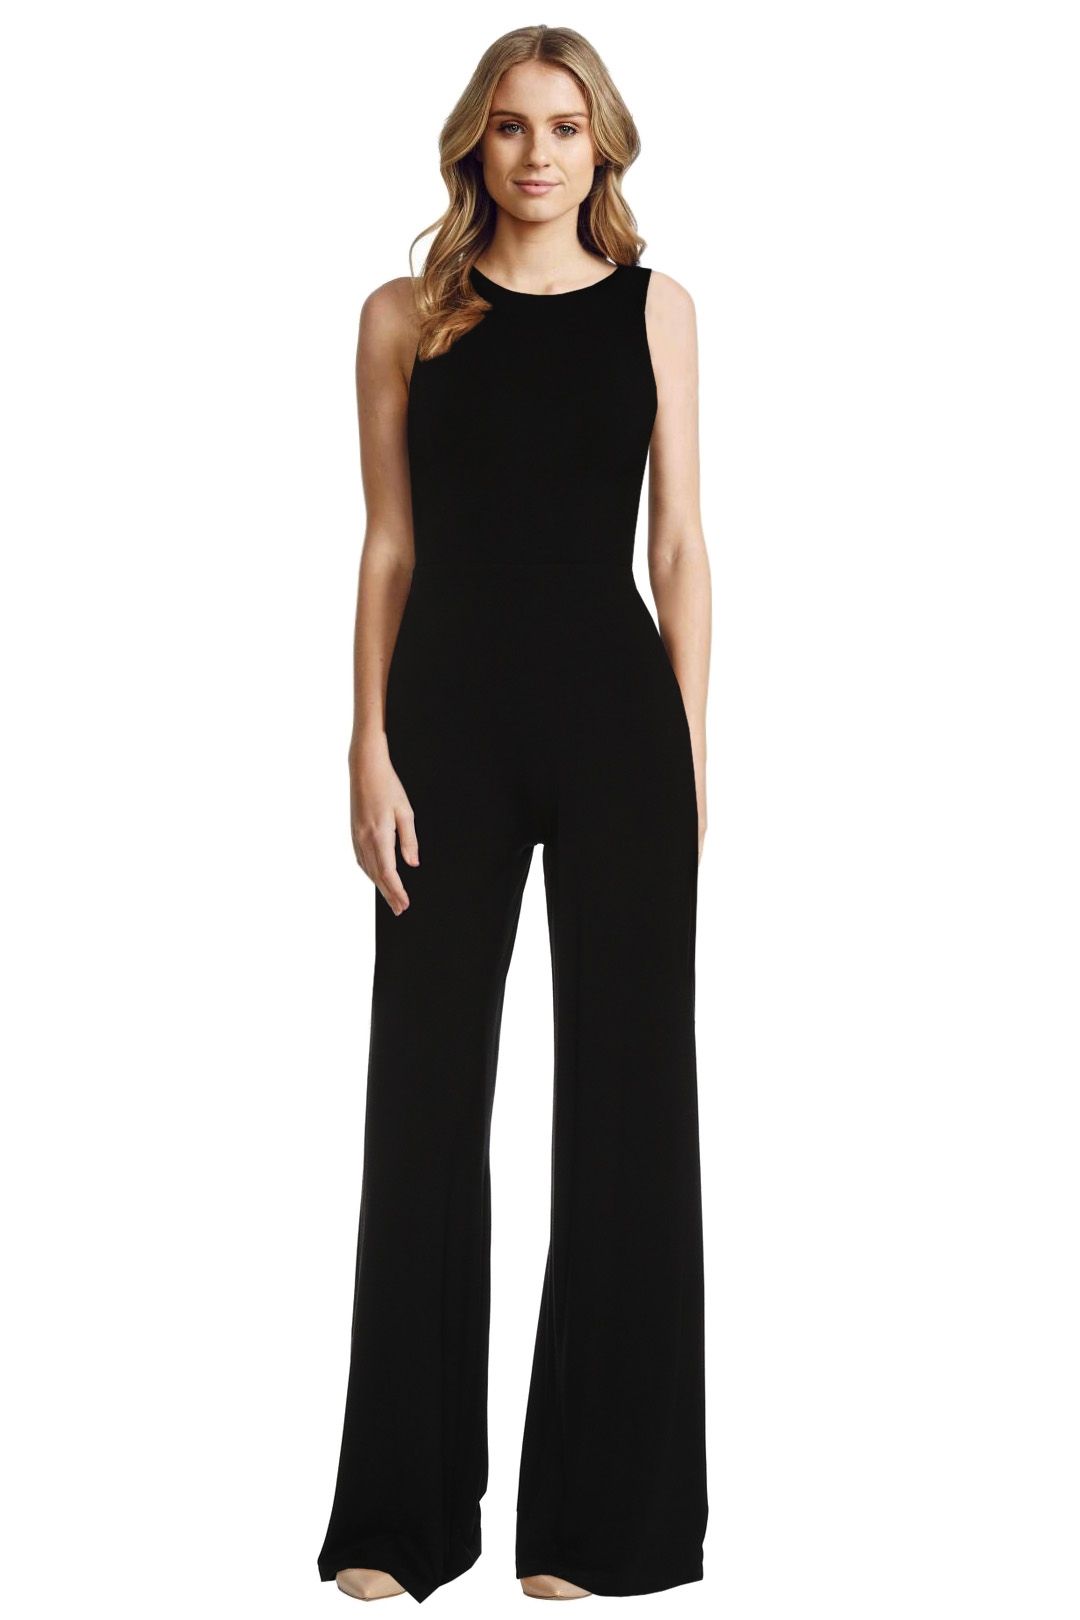 Alice and Olivia - Judee Racer Back Jumpsuit - Black - Front